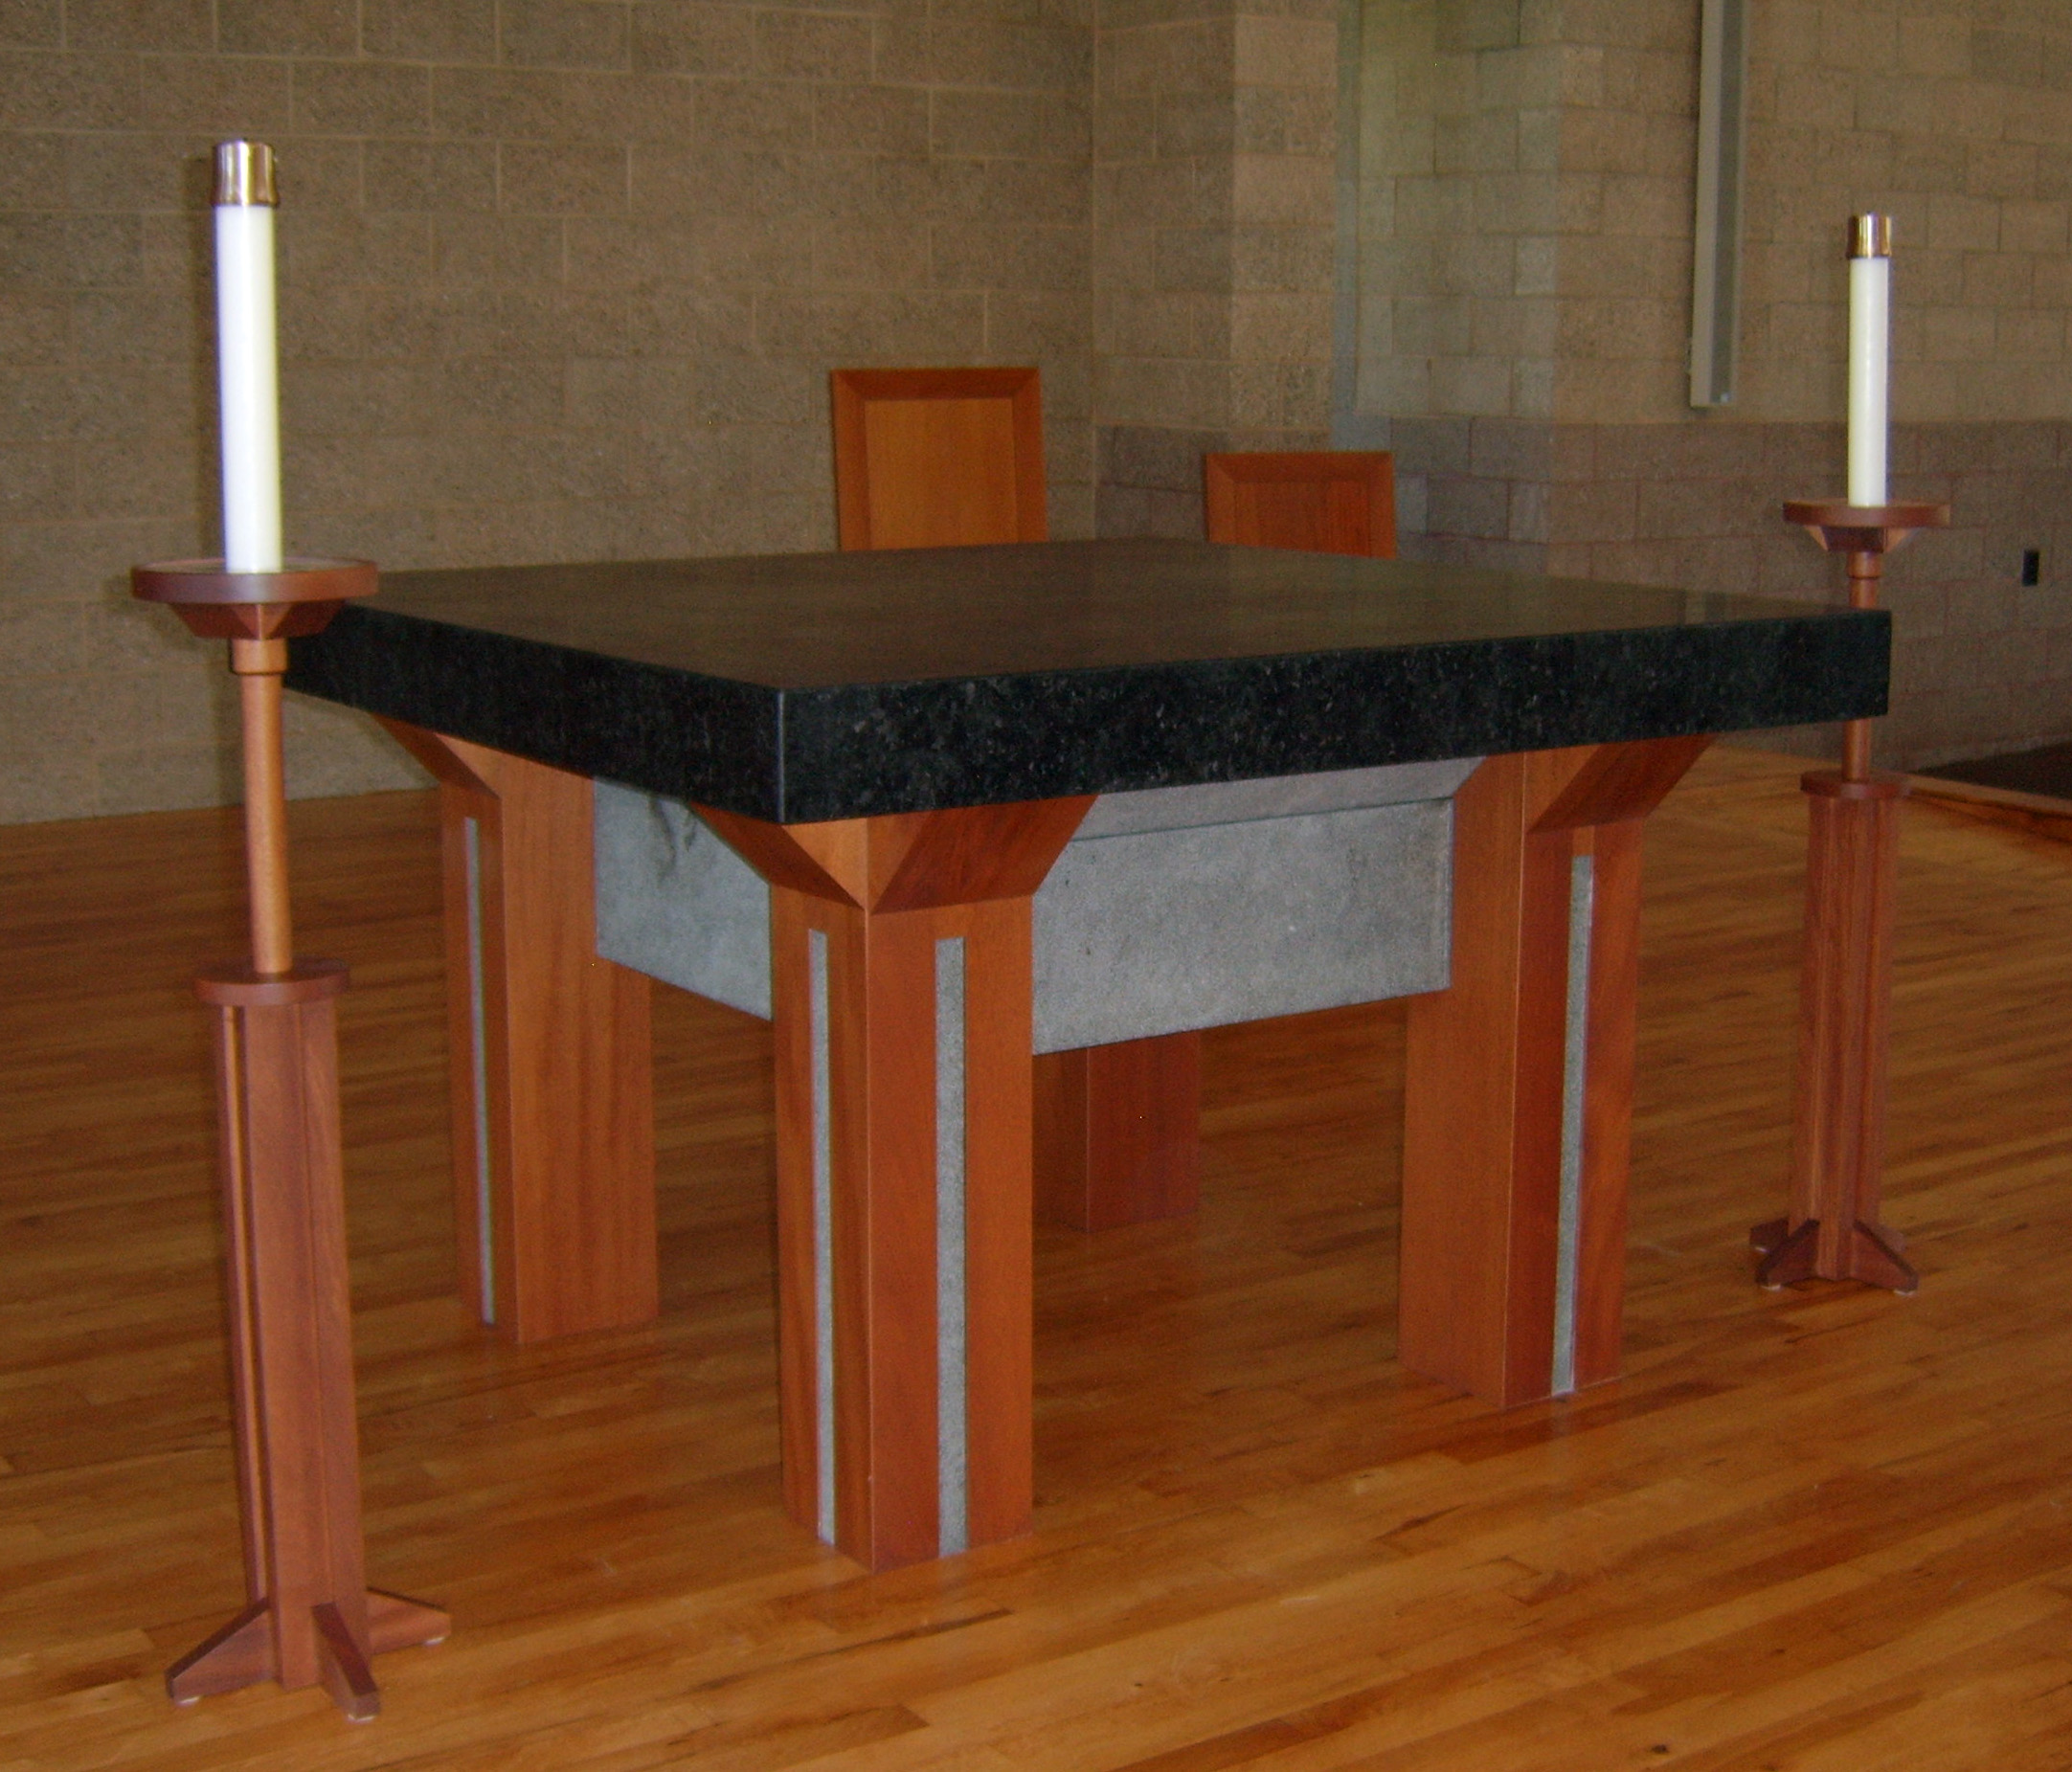 St. Thomas Processional Candle Stands